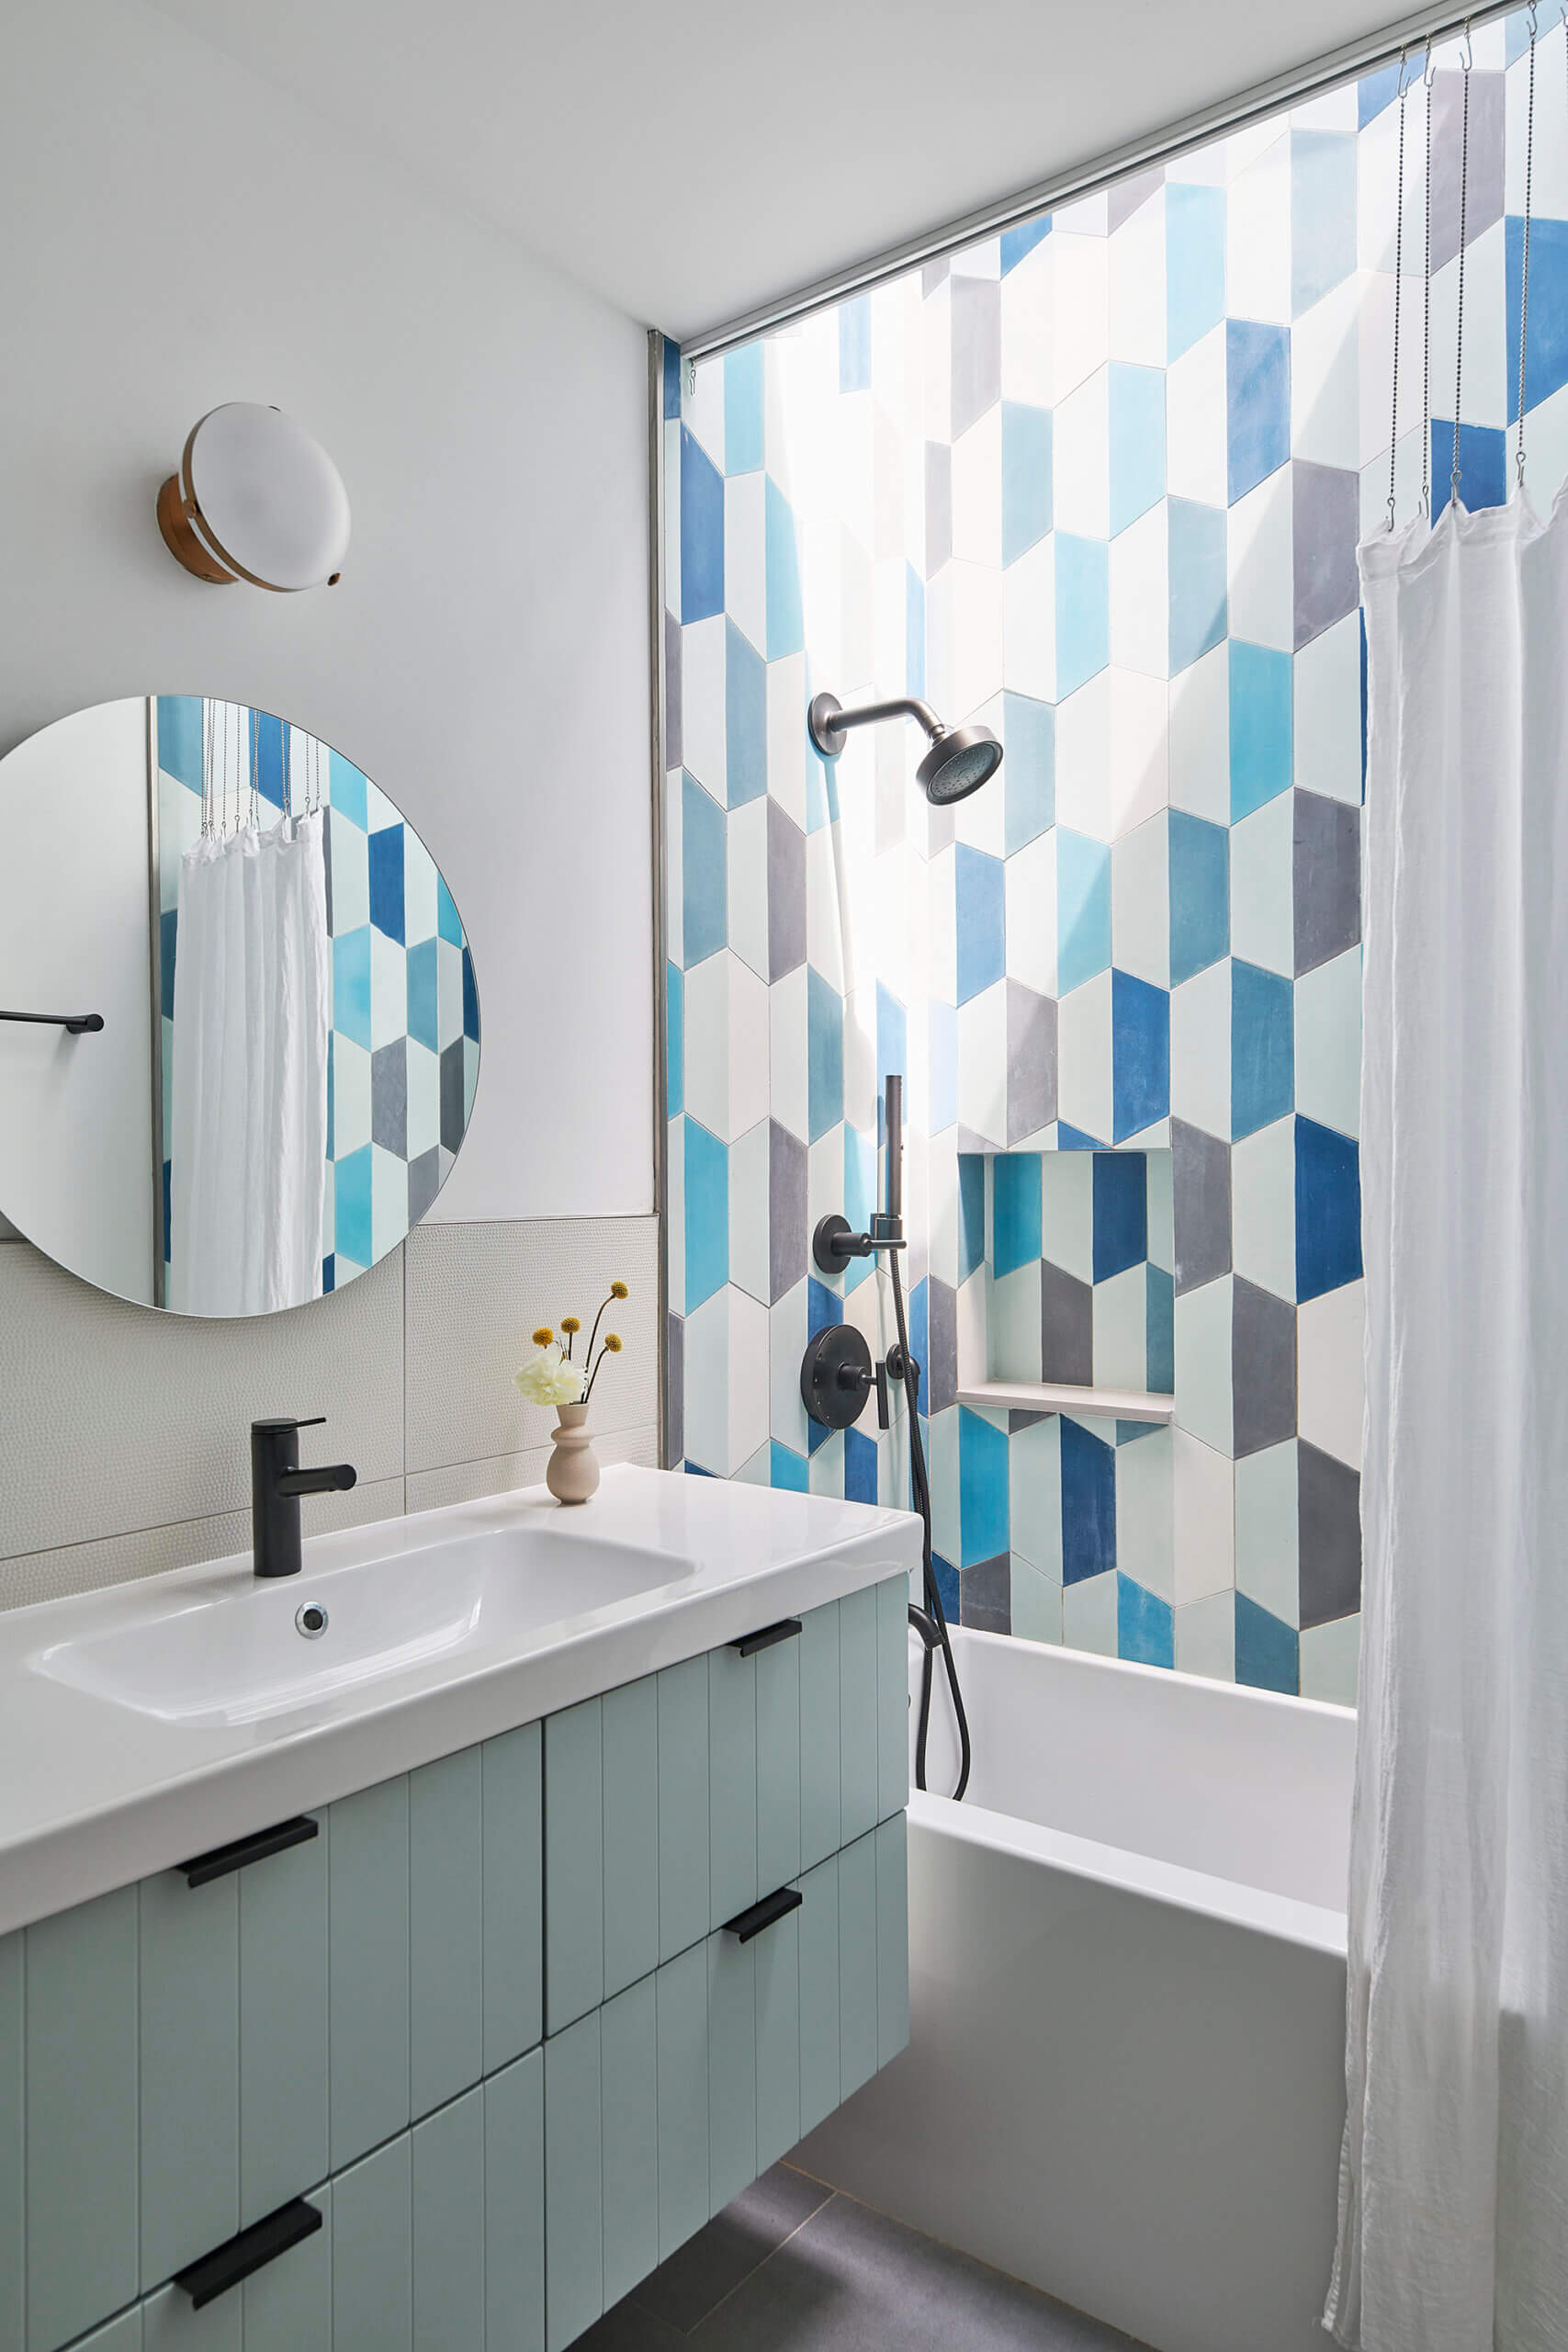 BATHROOM with graphic blue tile walls surrounding the tub